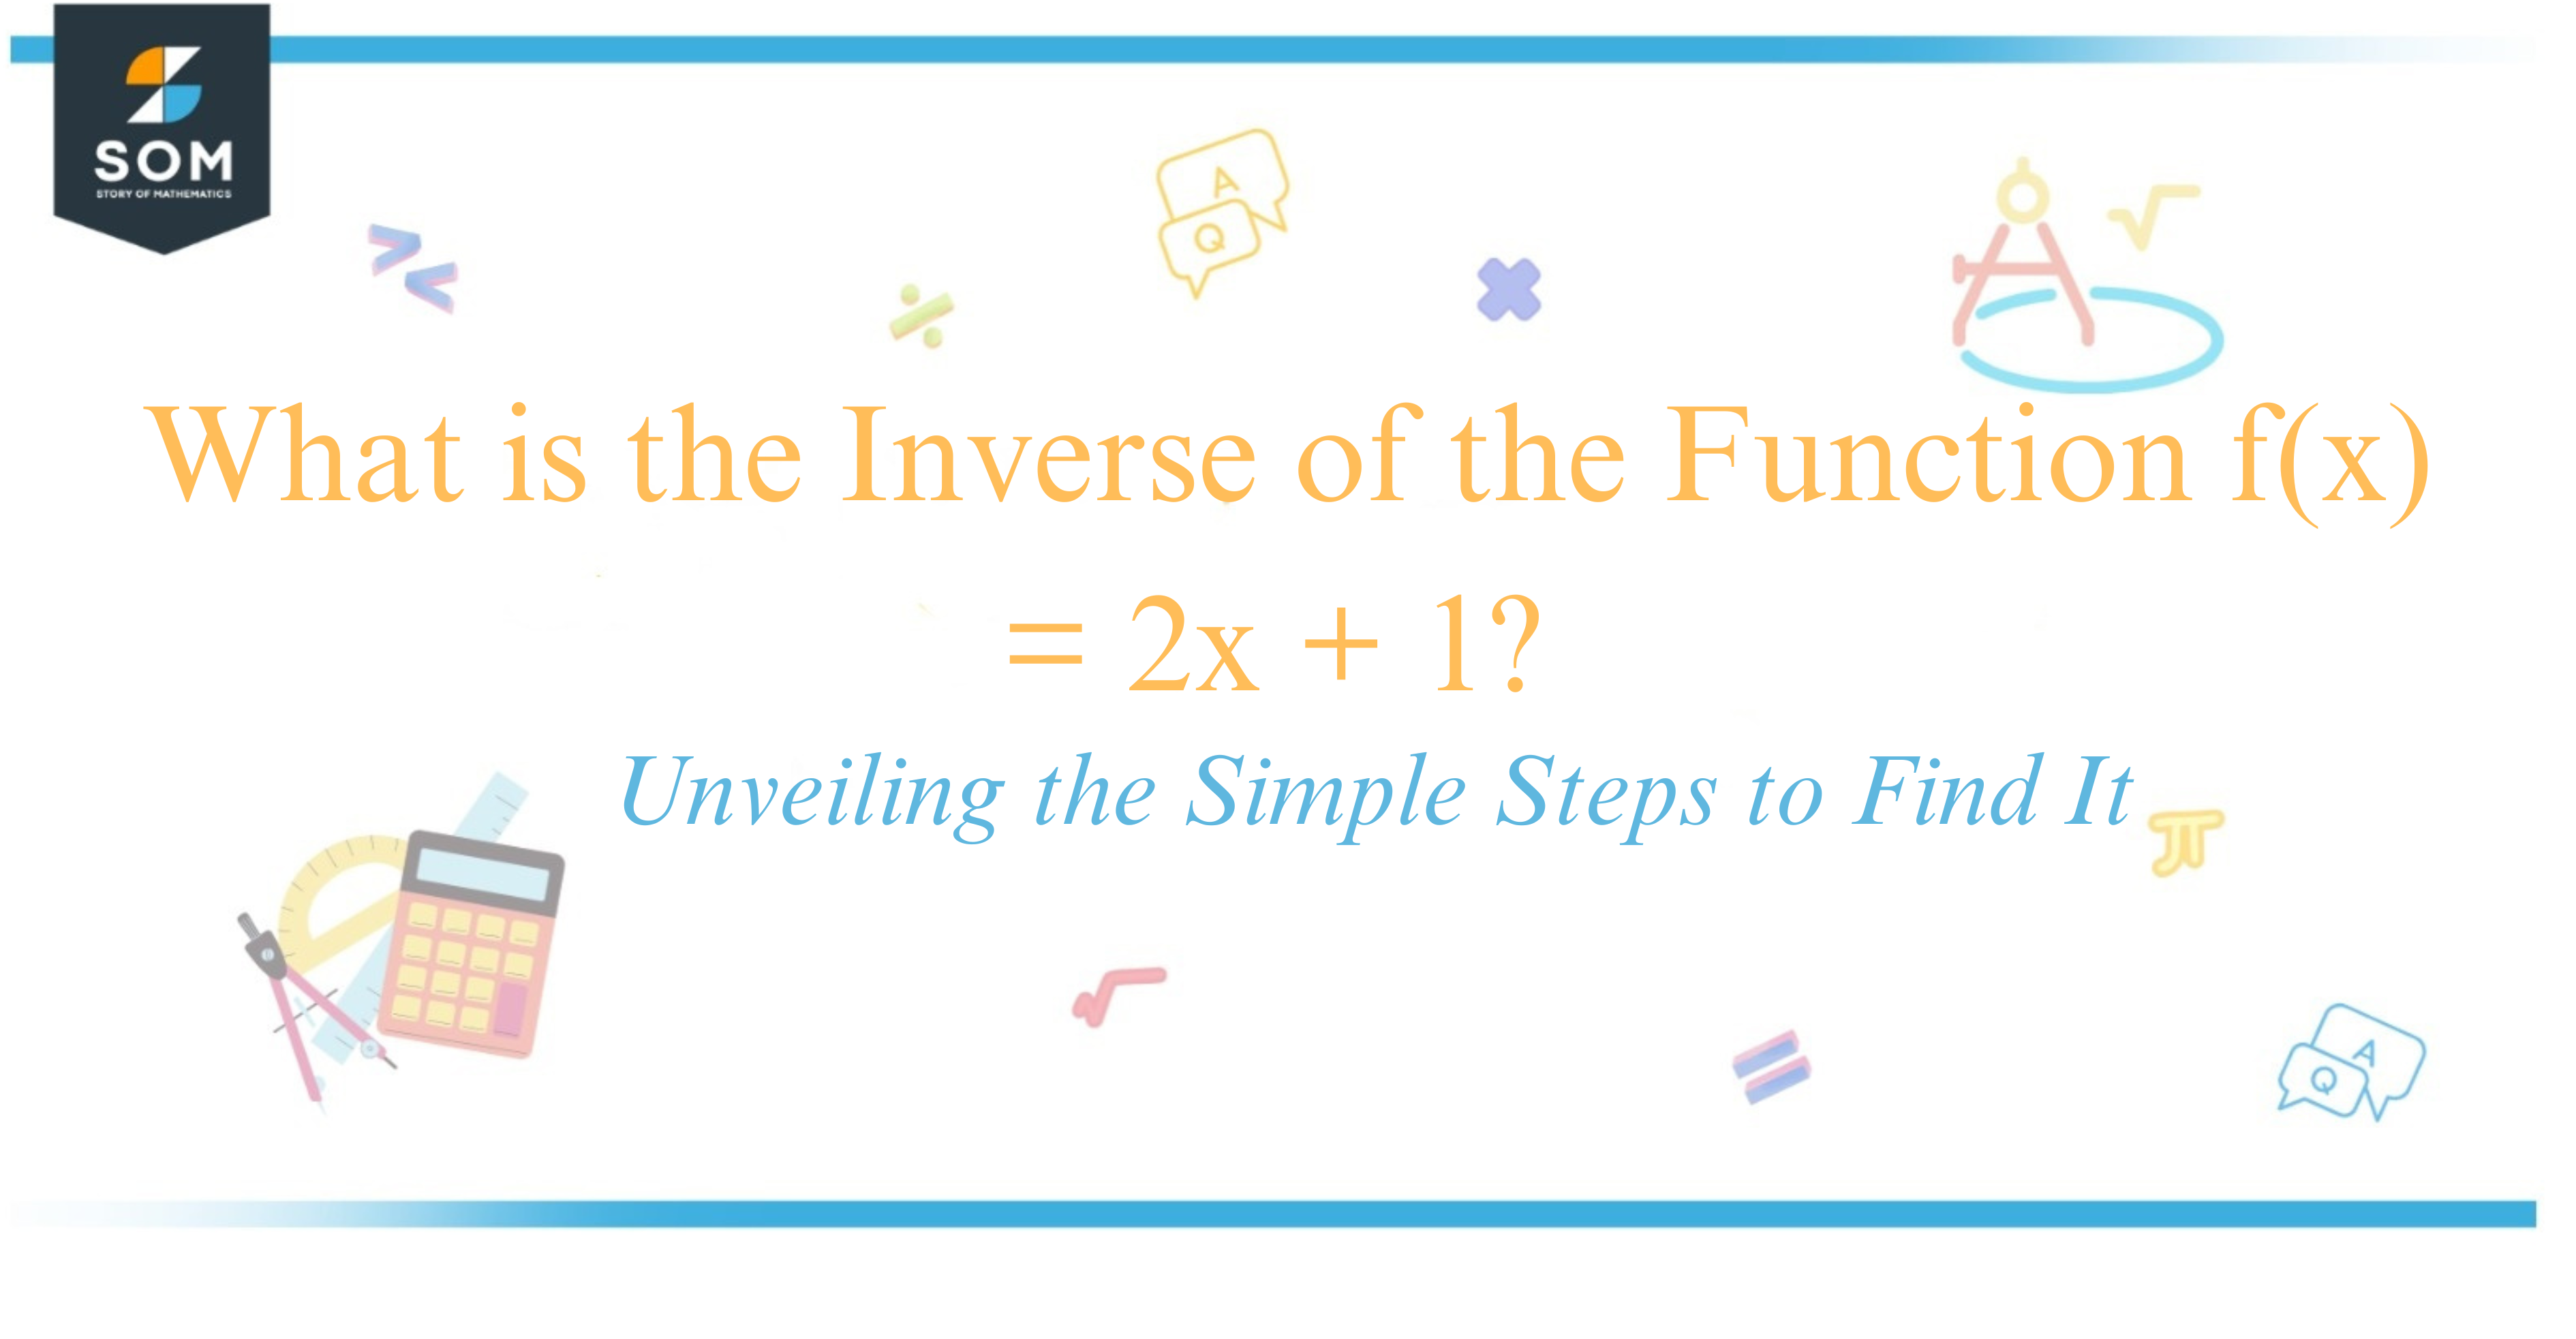 What is the Inverse of the Function f(x) = 2x + 1 Unveiling the Simple Steps to Find It